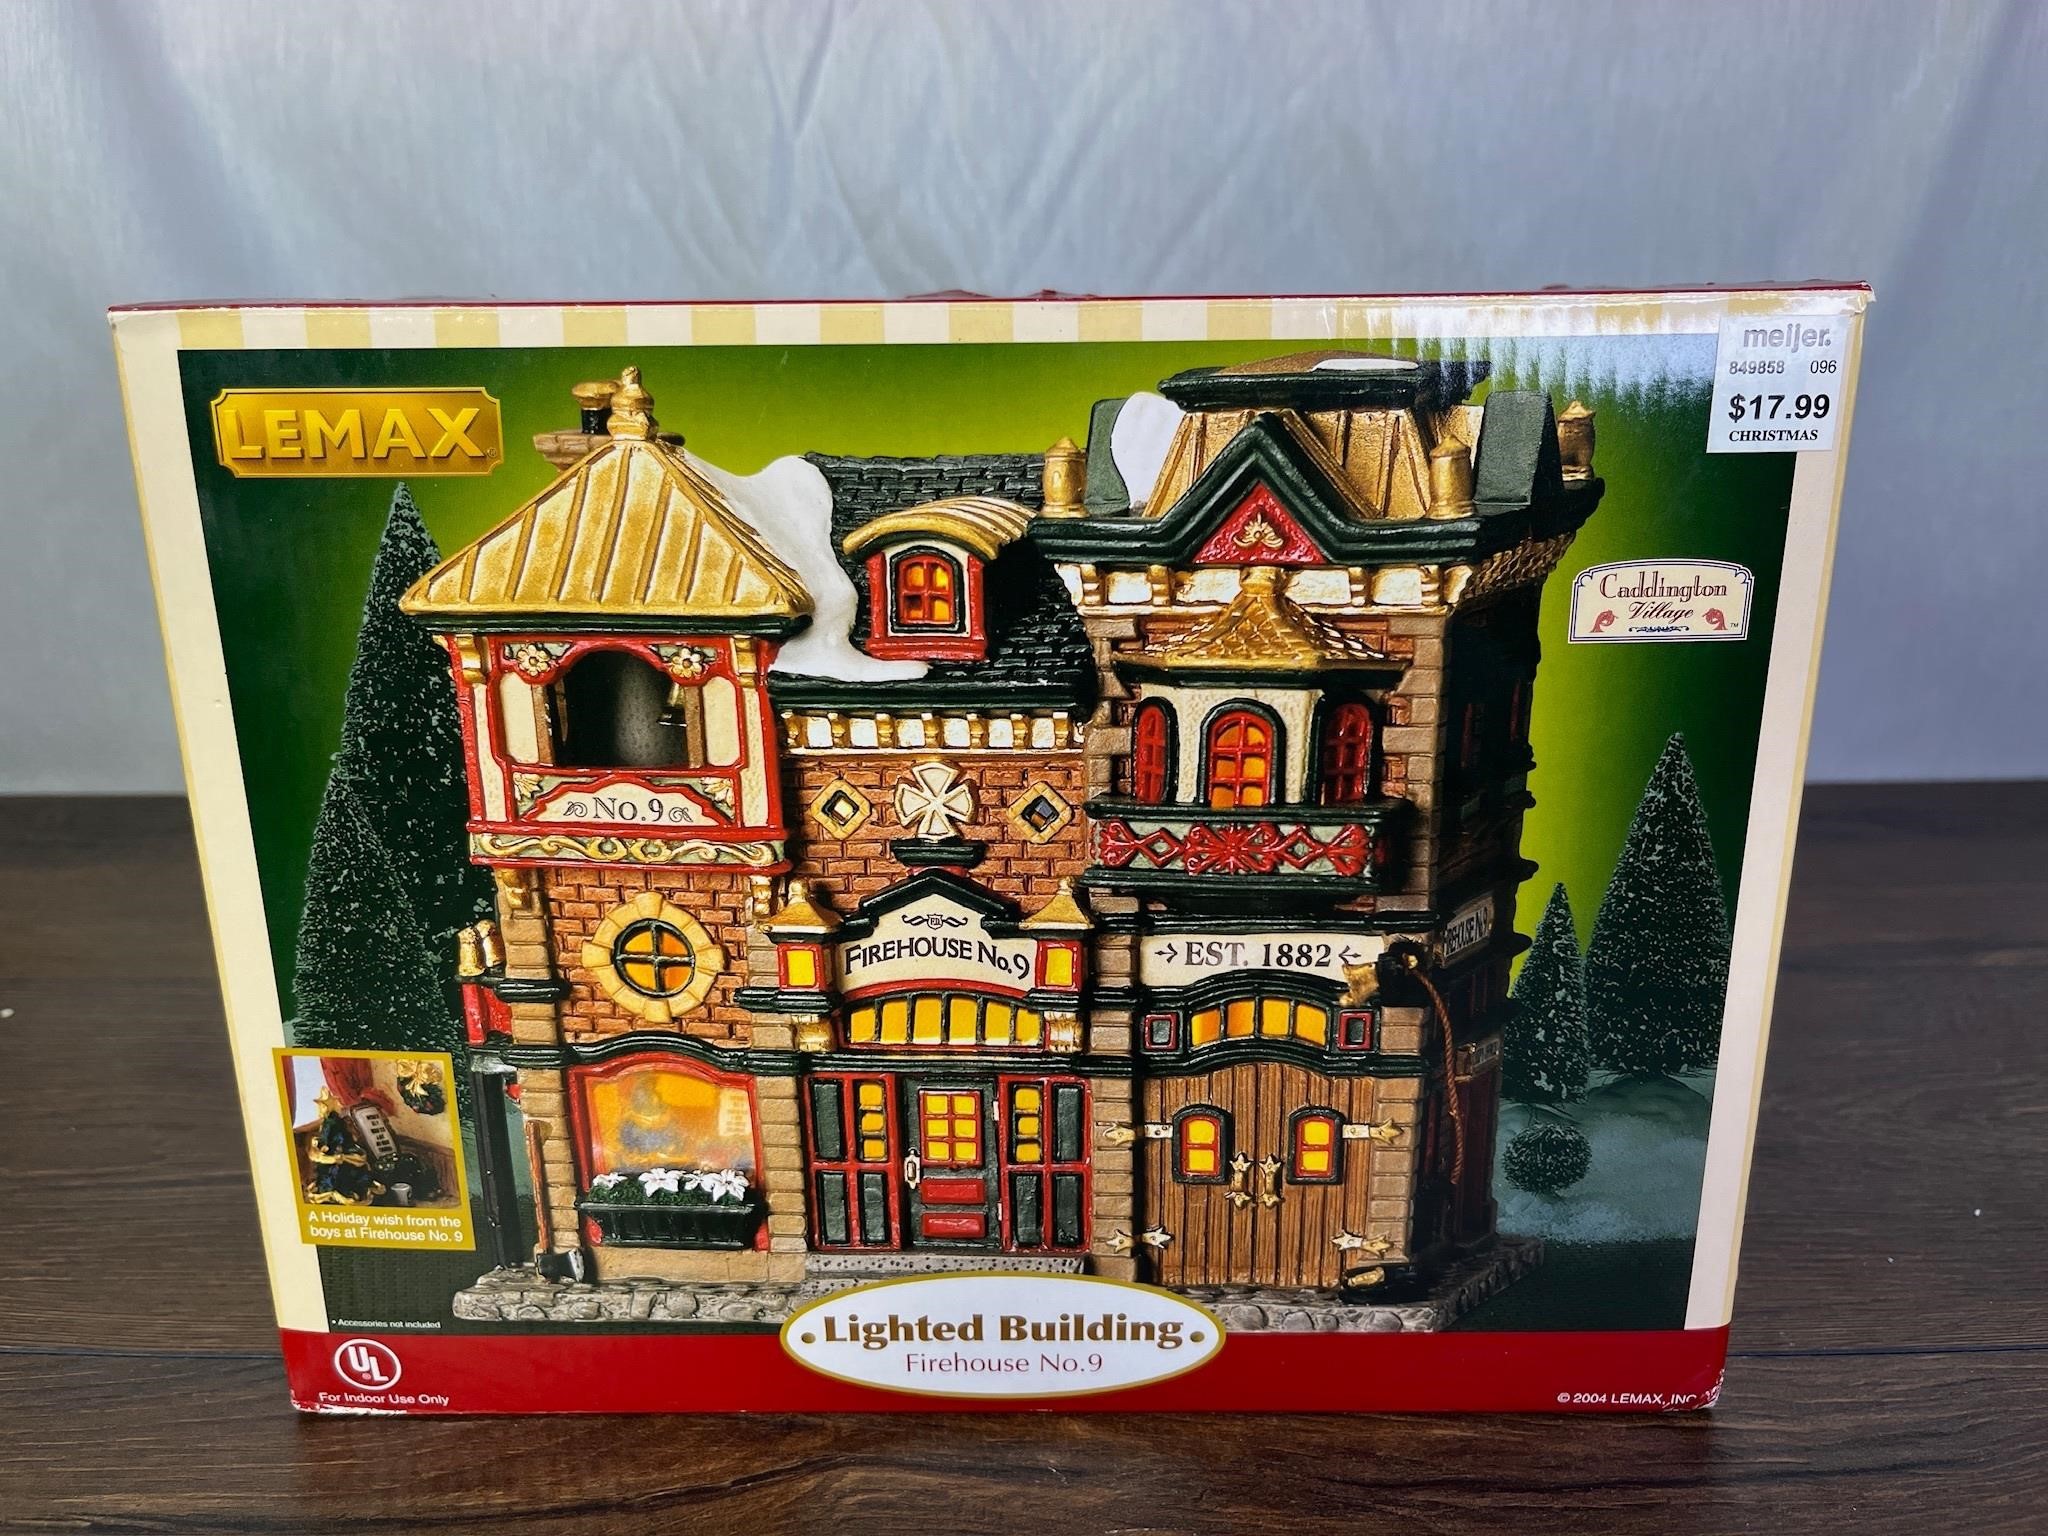 Lemax Firehouse No. 9 in Box